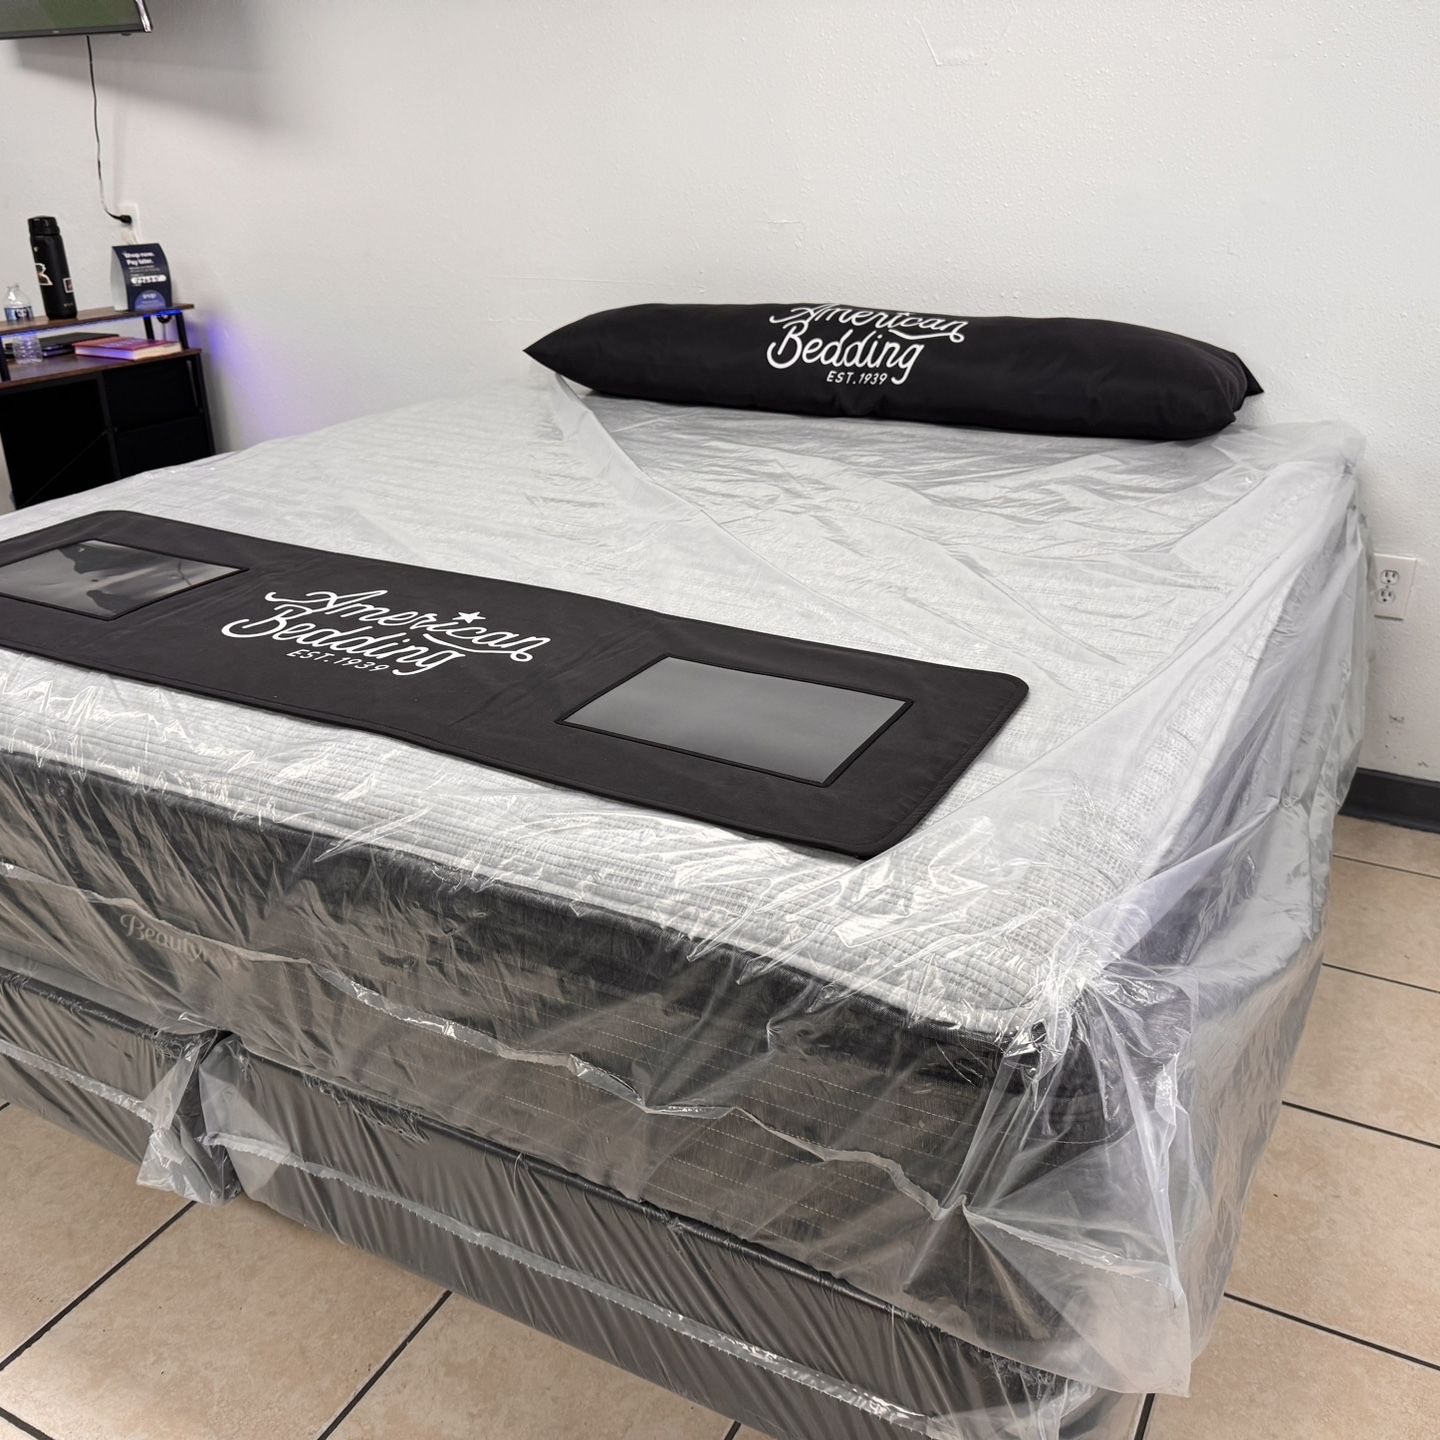 King Pillow Top Simmons Beautyrest Quilted Medium Mattress Special $499 Only Or $550 With Boxspring 